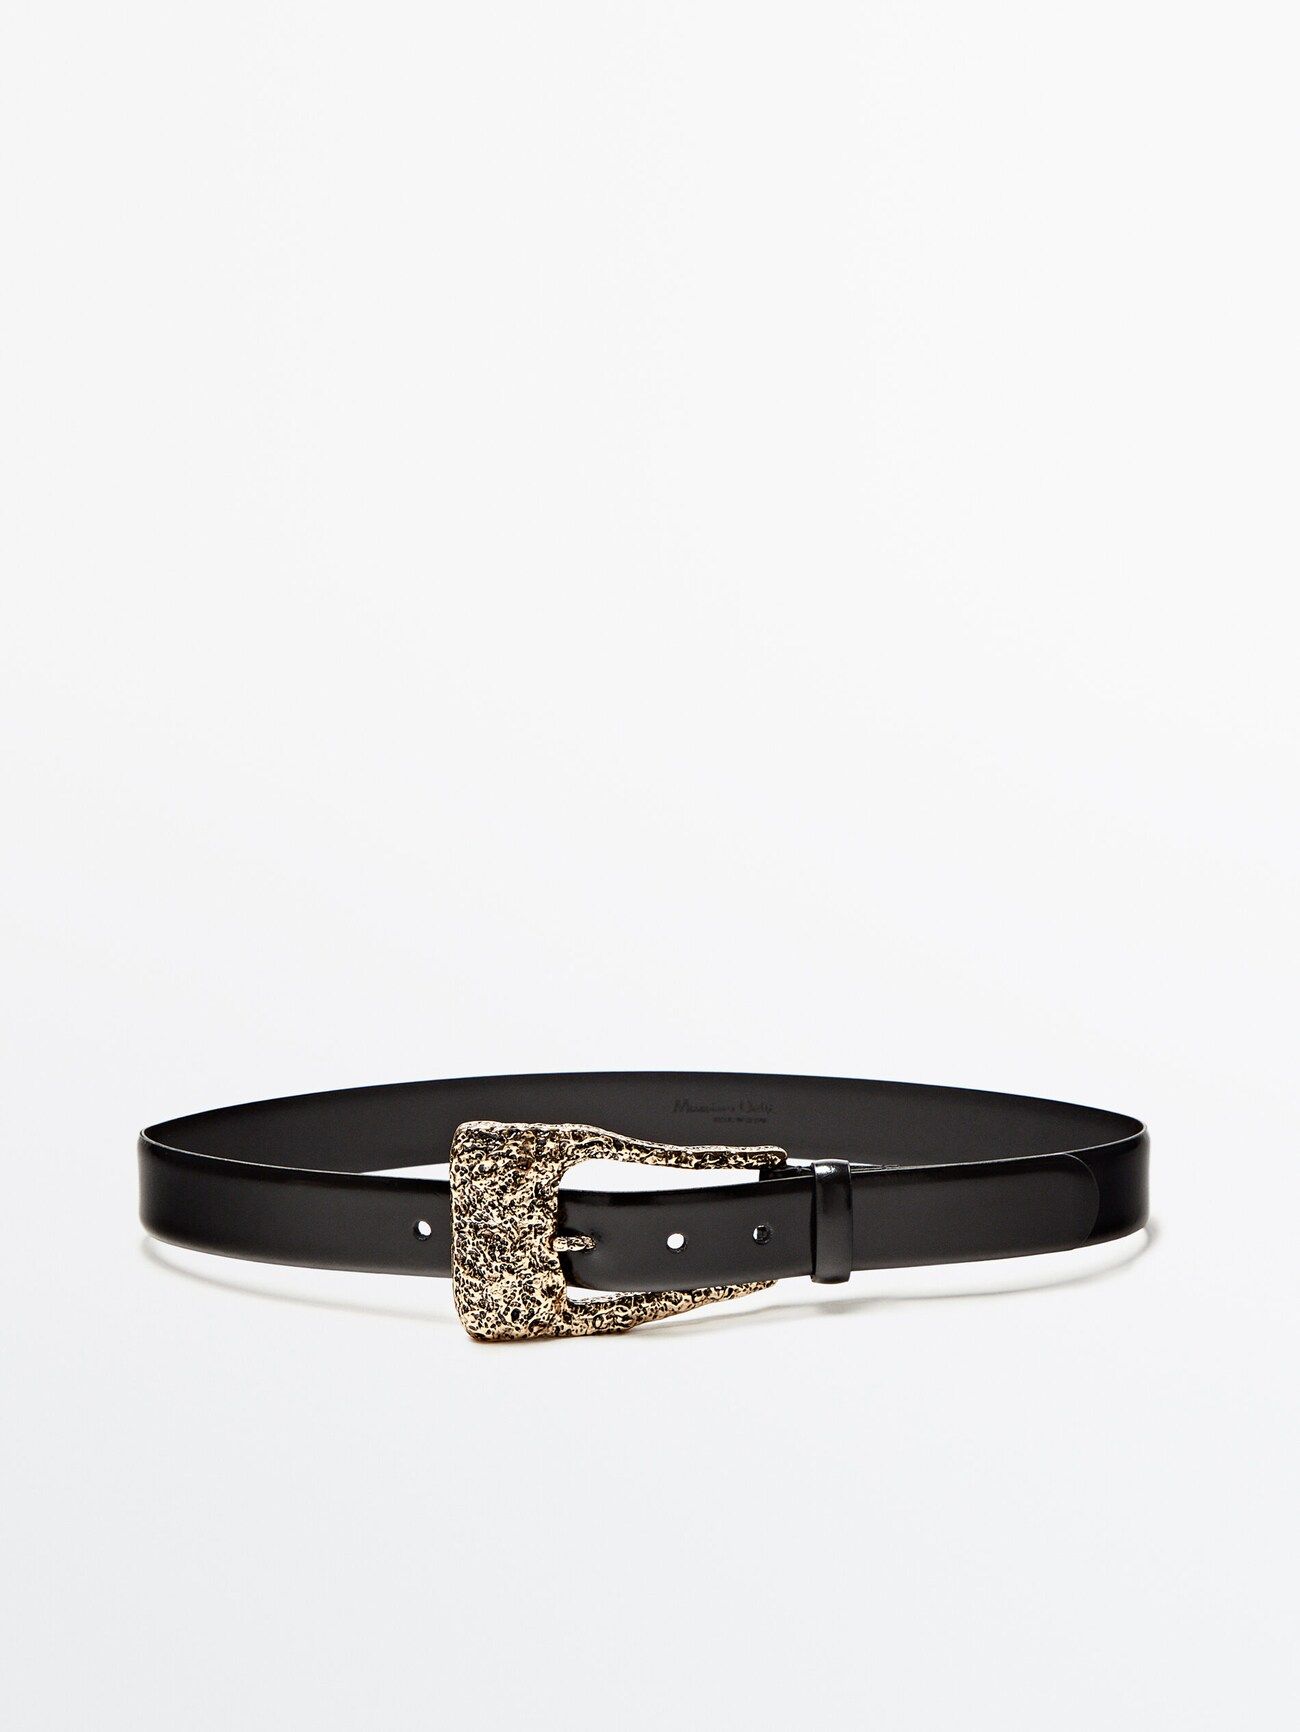 Leather belt with textured buckle | Massimo Dutti (US)